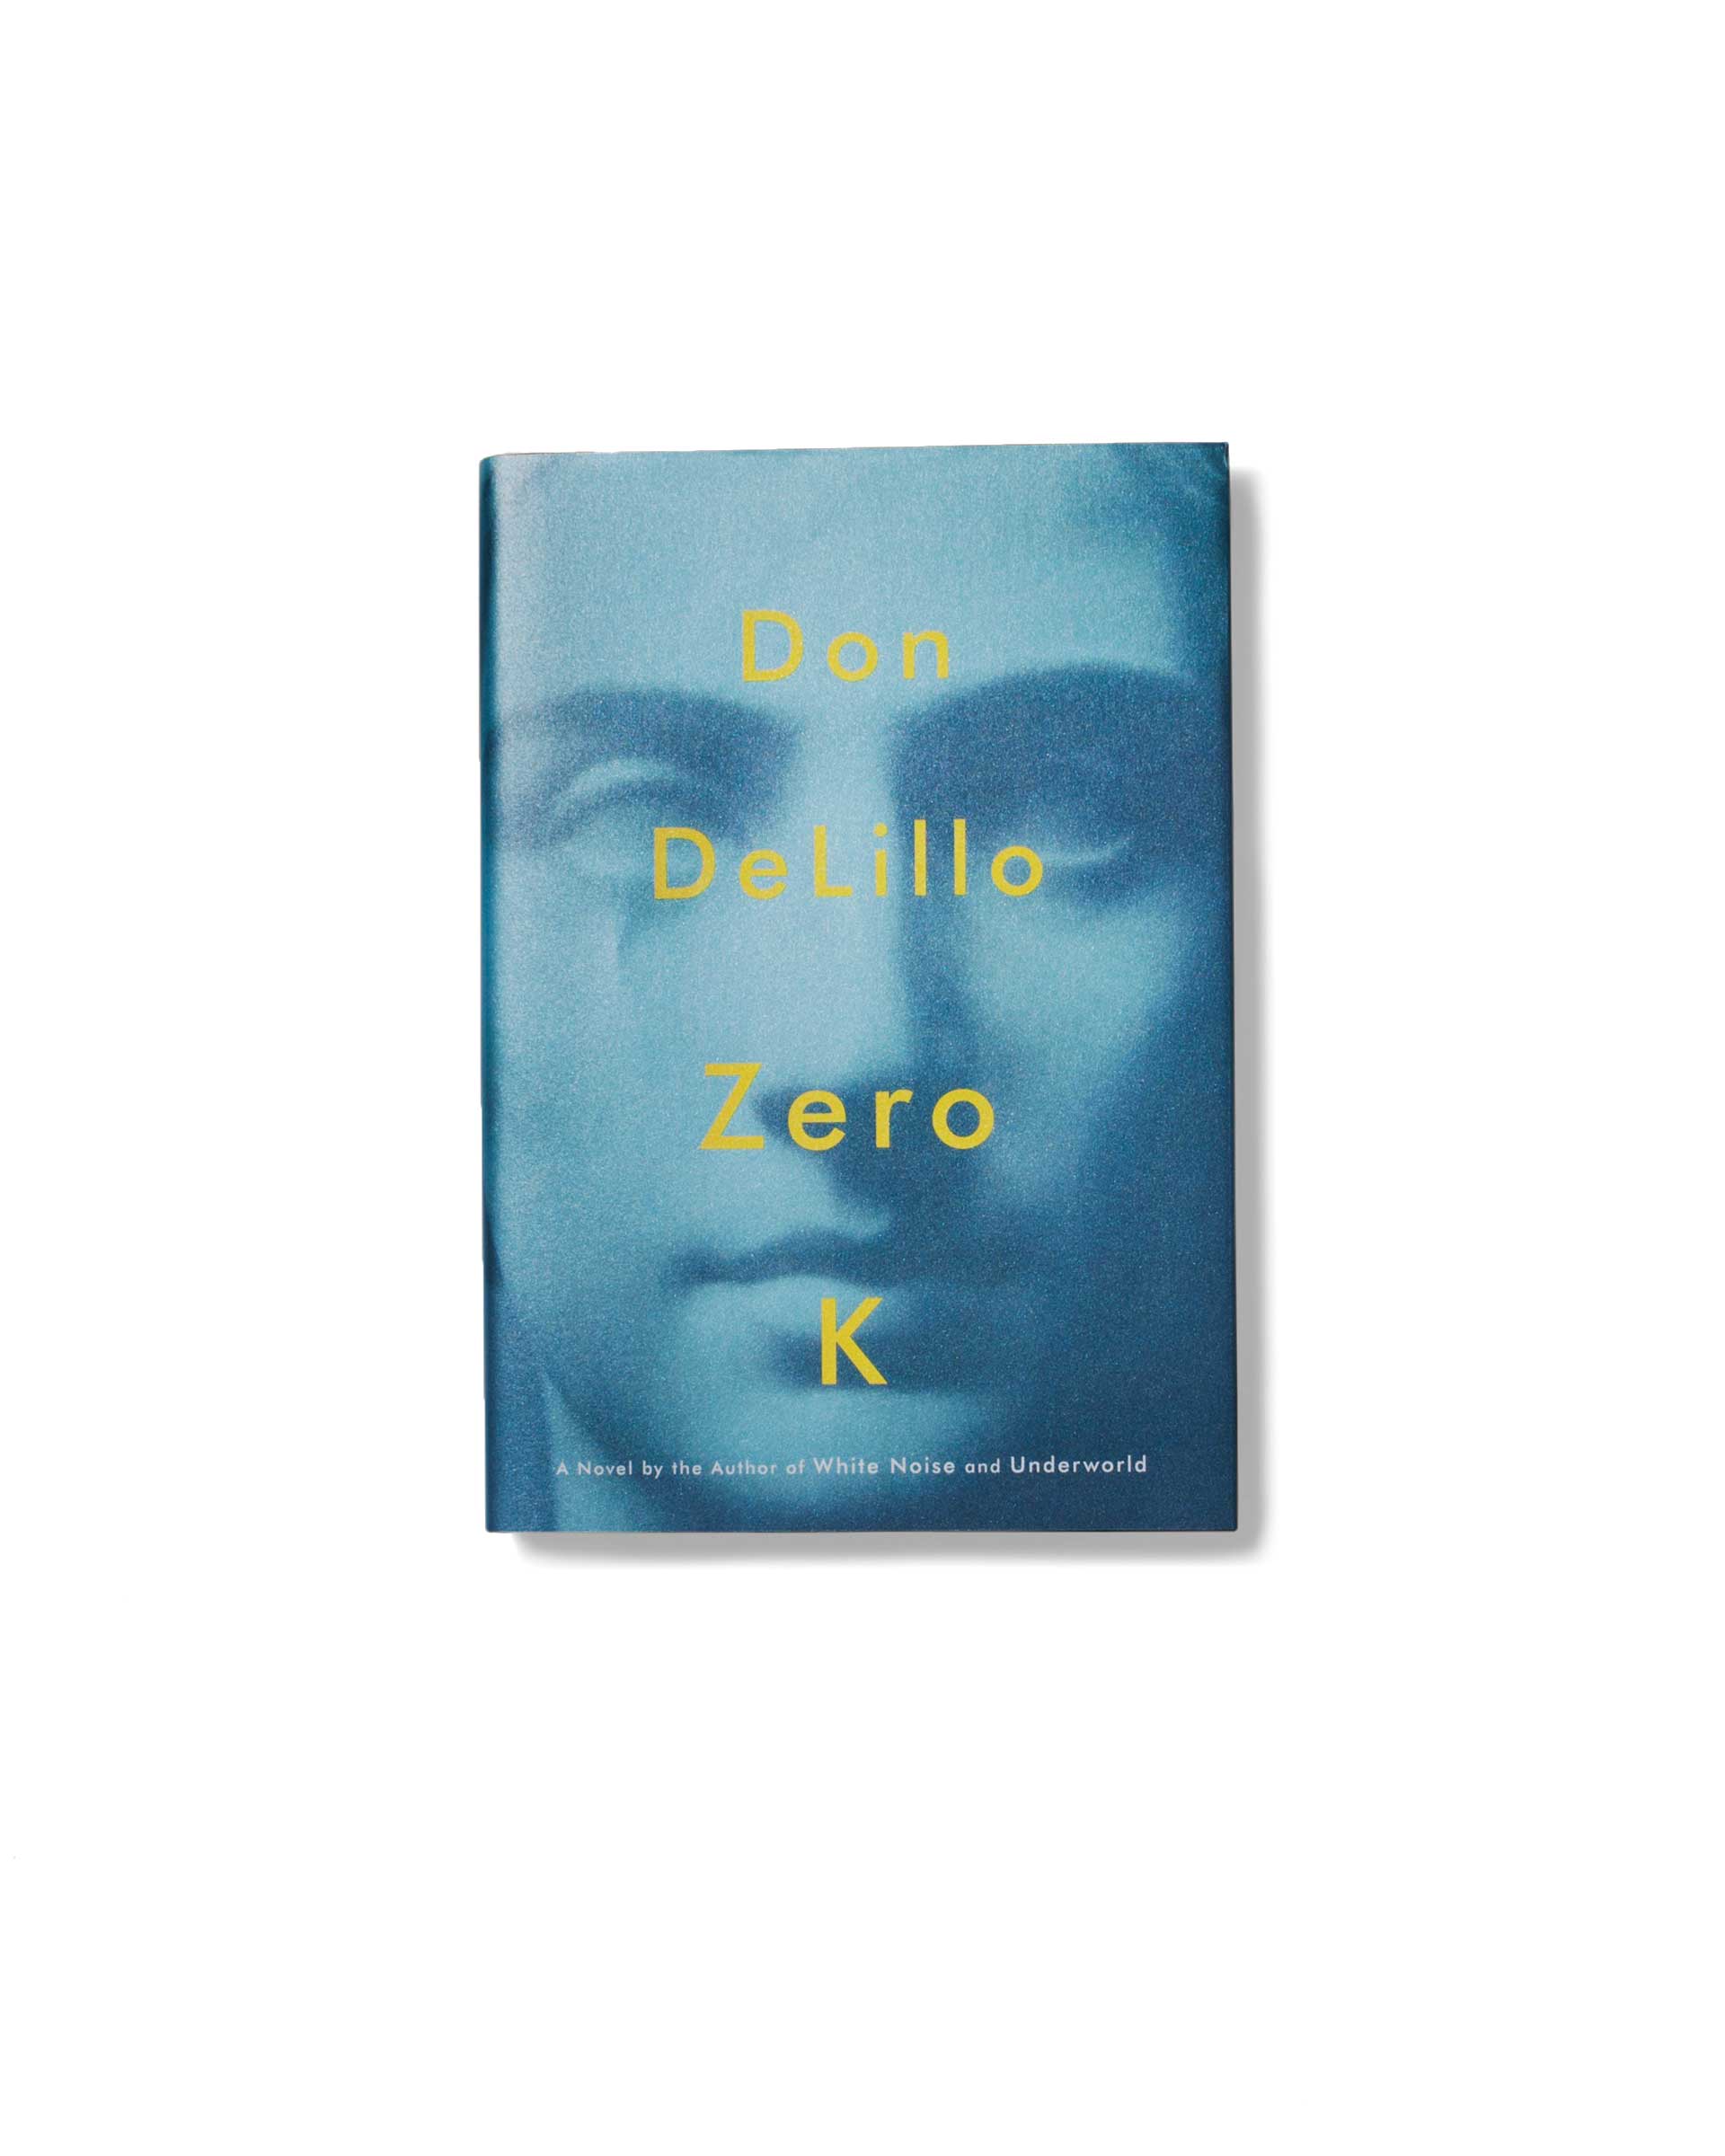 In his new novel, Don DeLillo dances with death